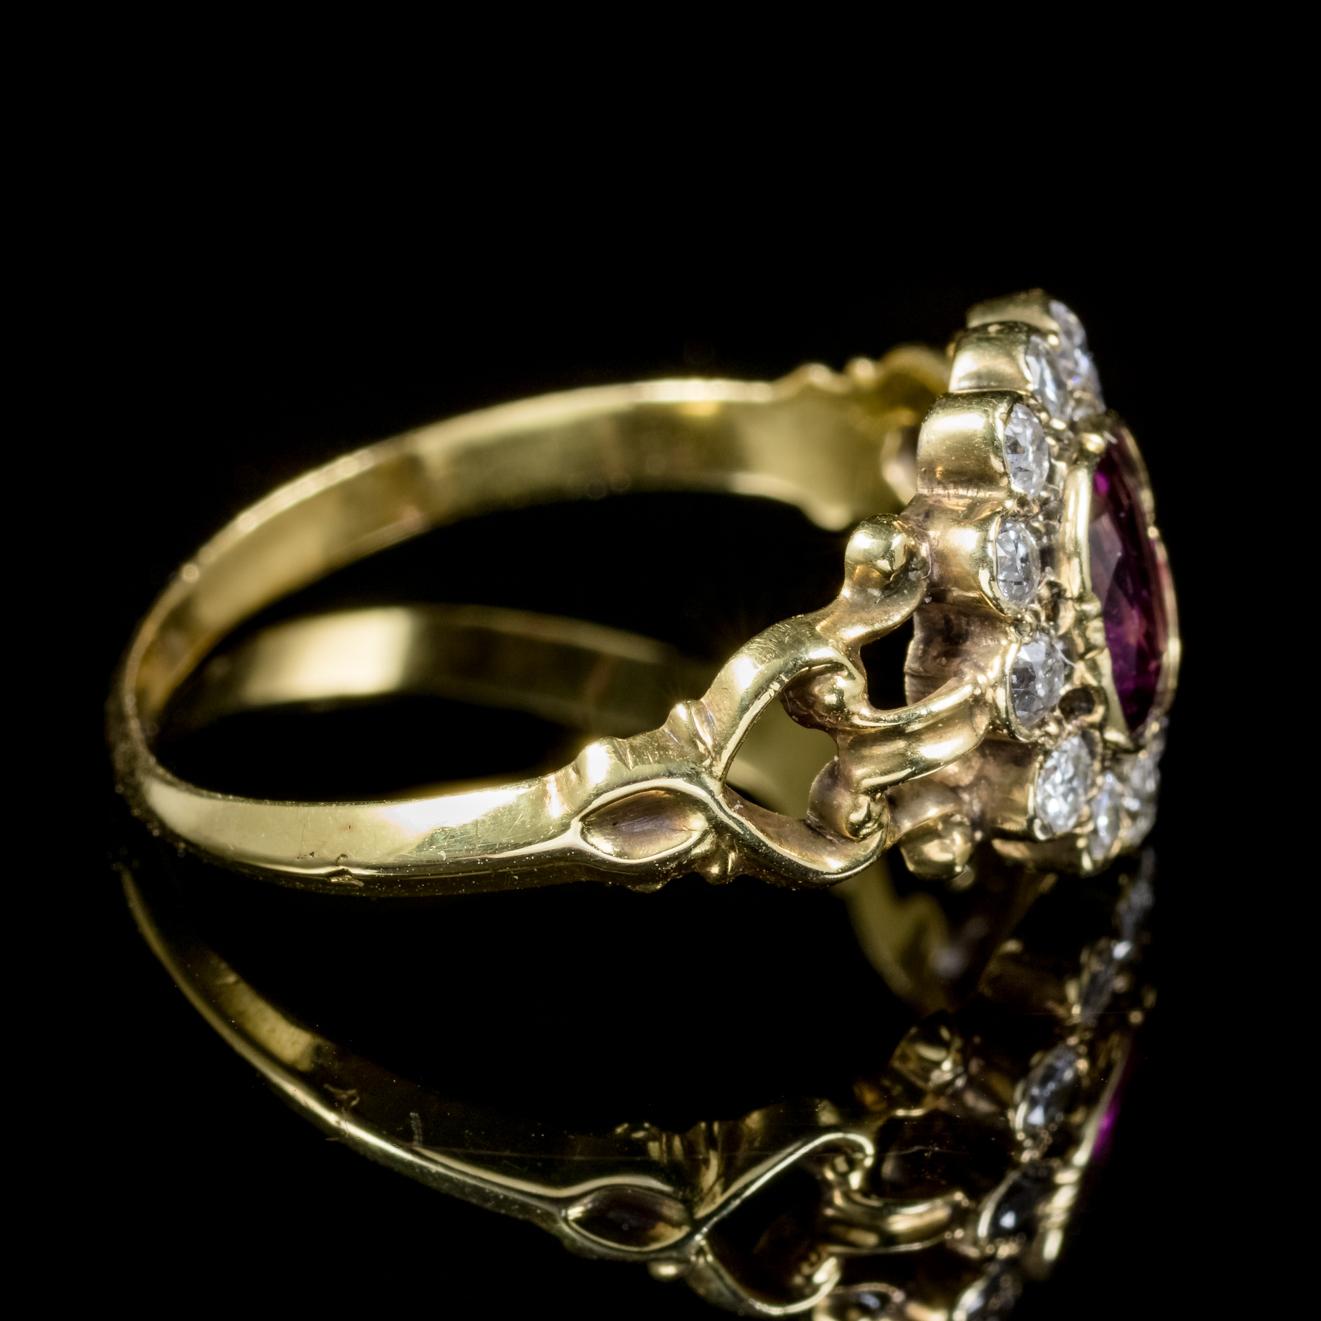 Women's Antique French Victorian Amethyst Diamond Cluster Ring 18 Carat Gold, circa 1860